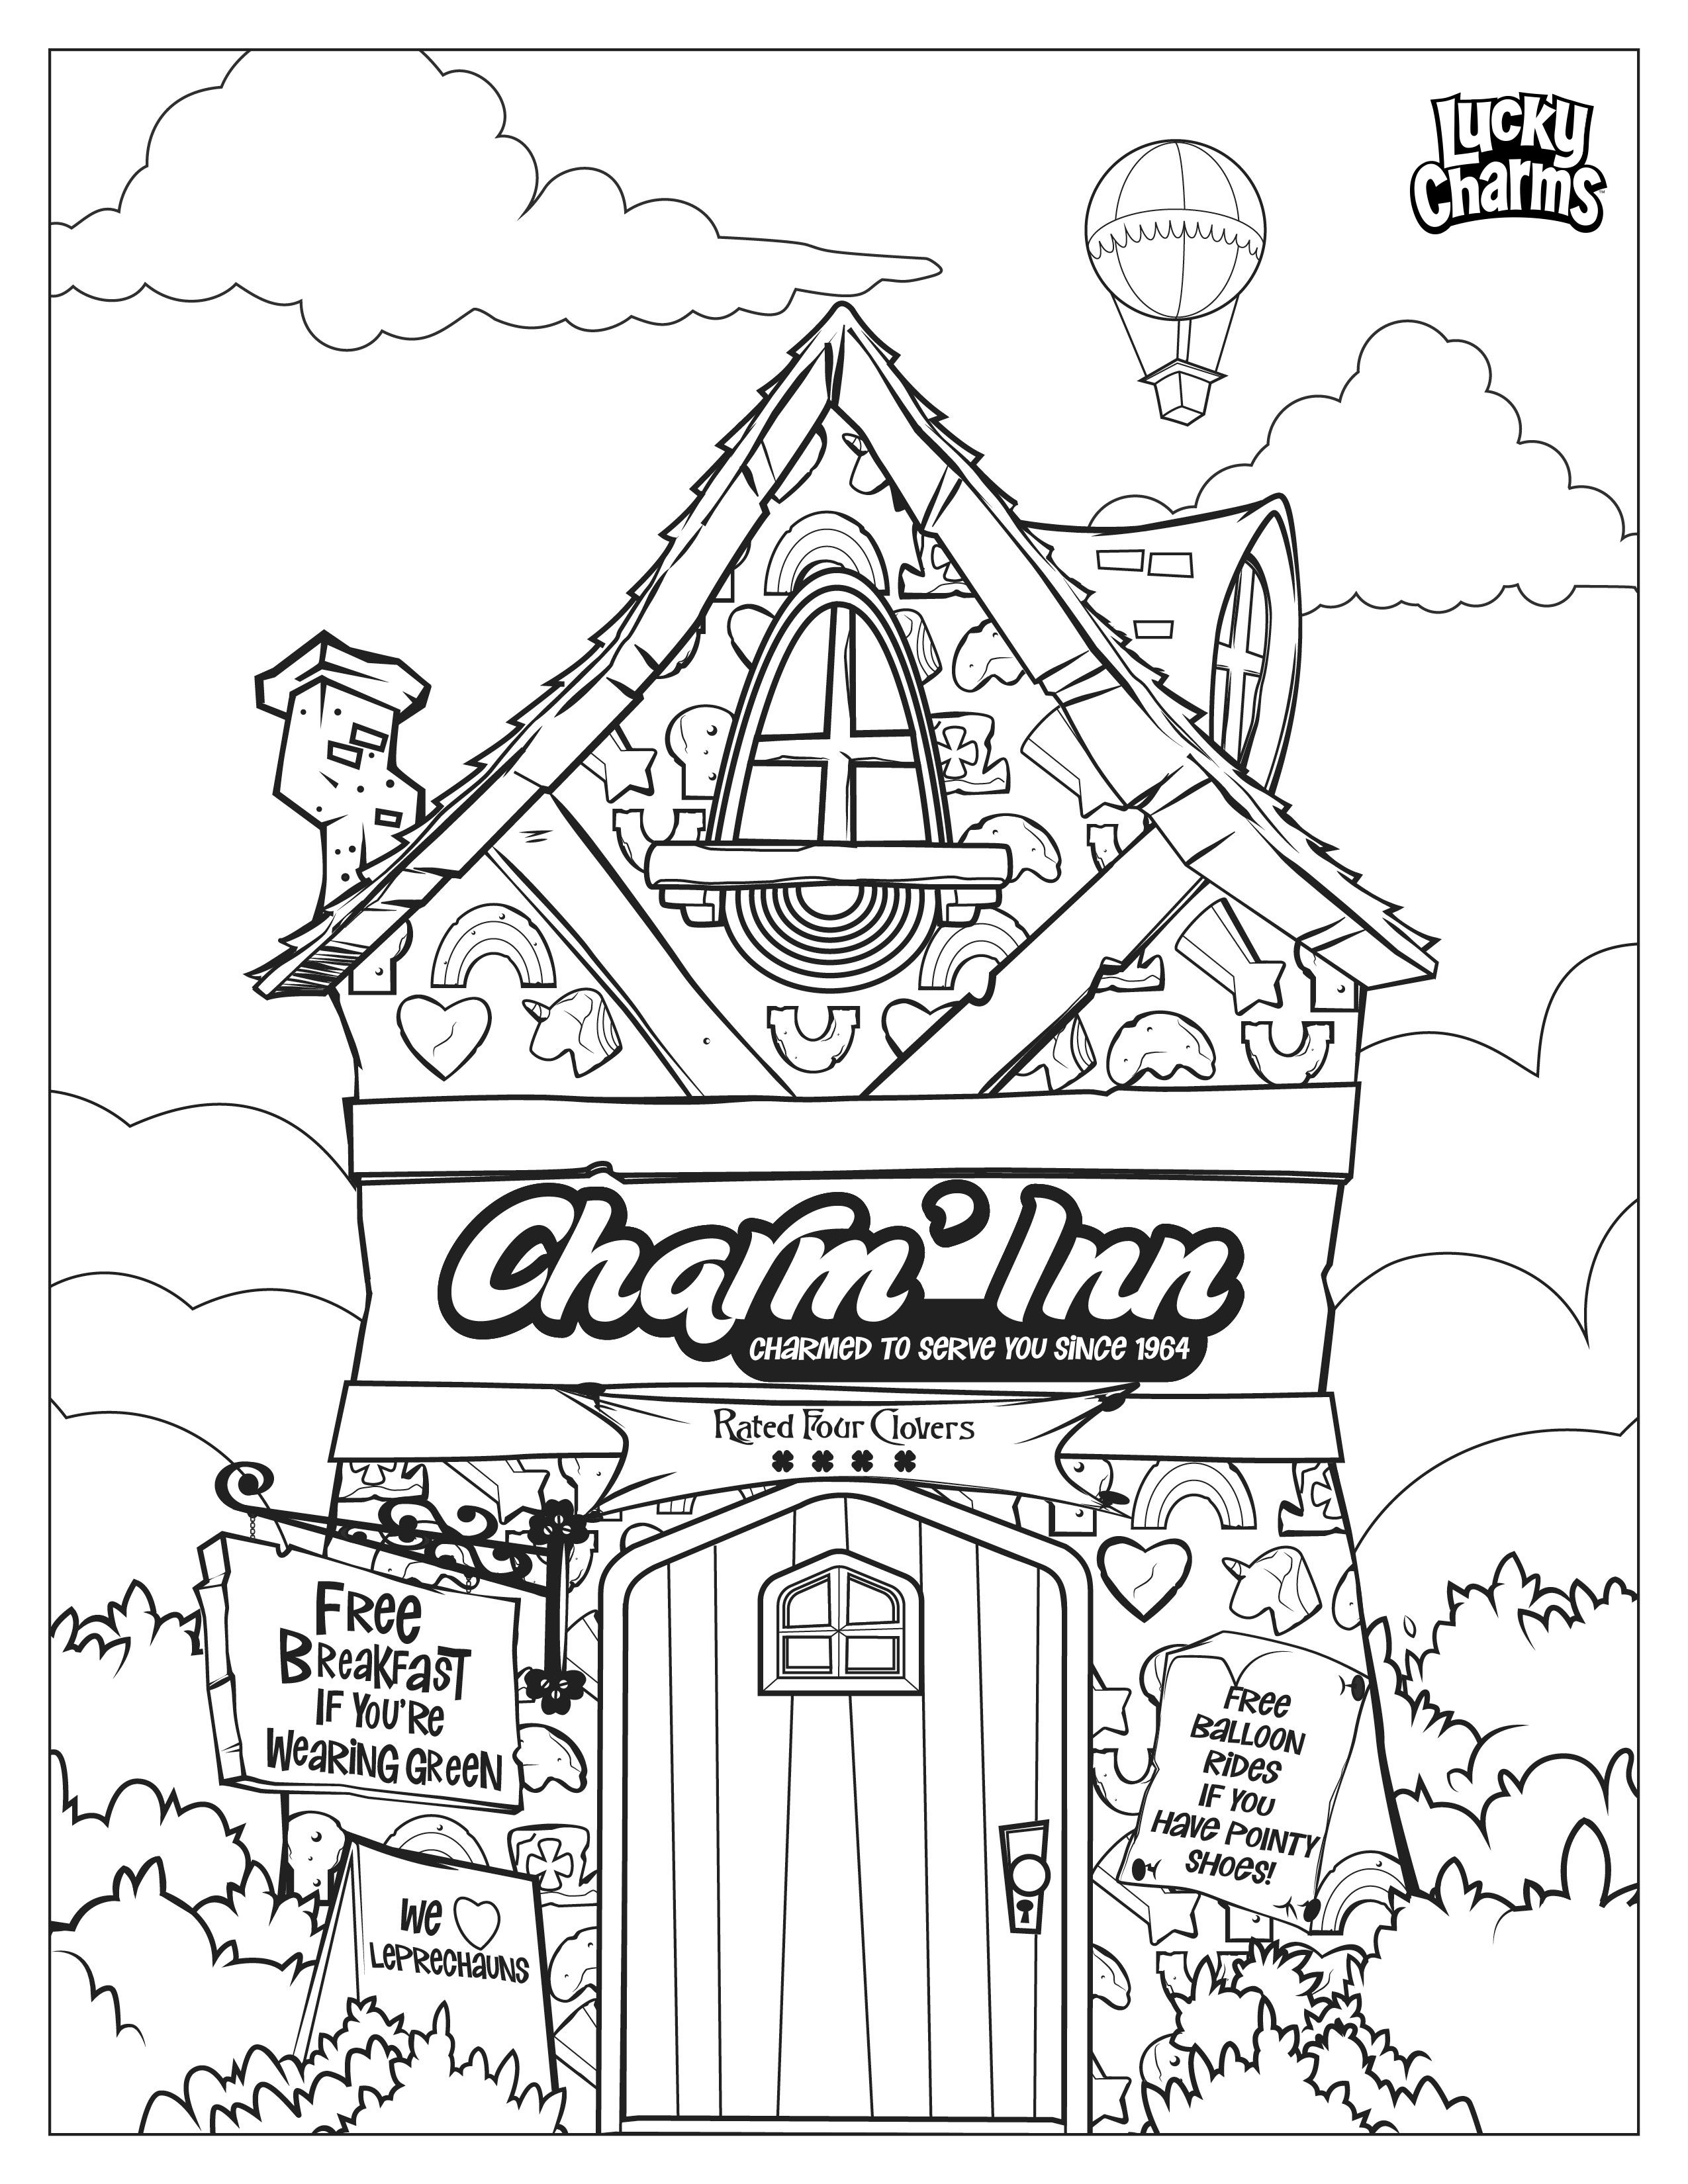 Magical lucky charms coloring page